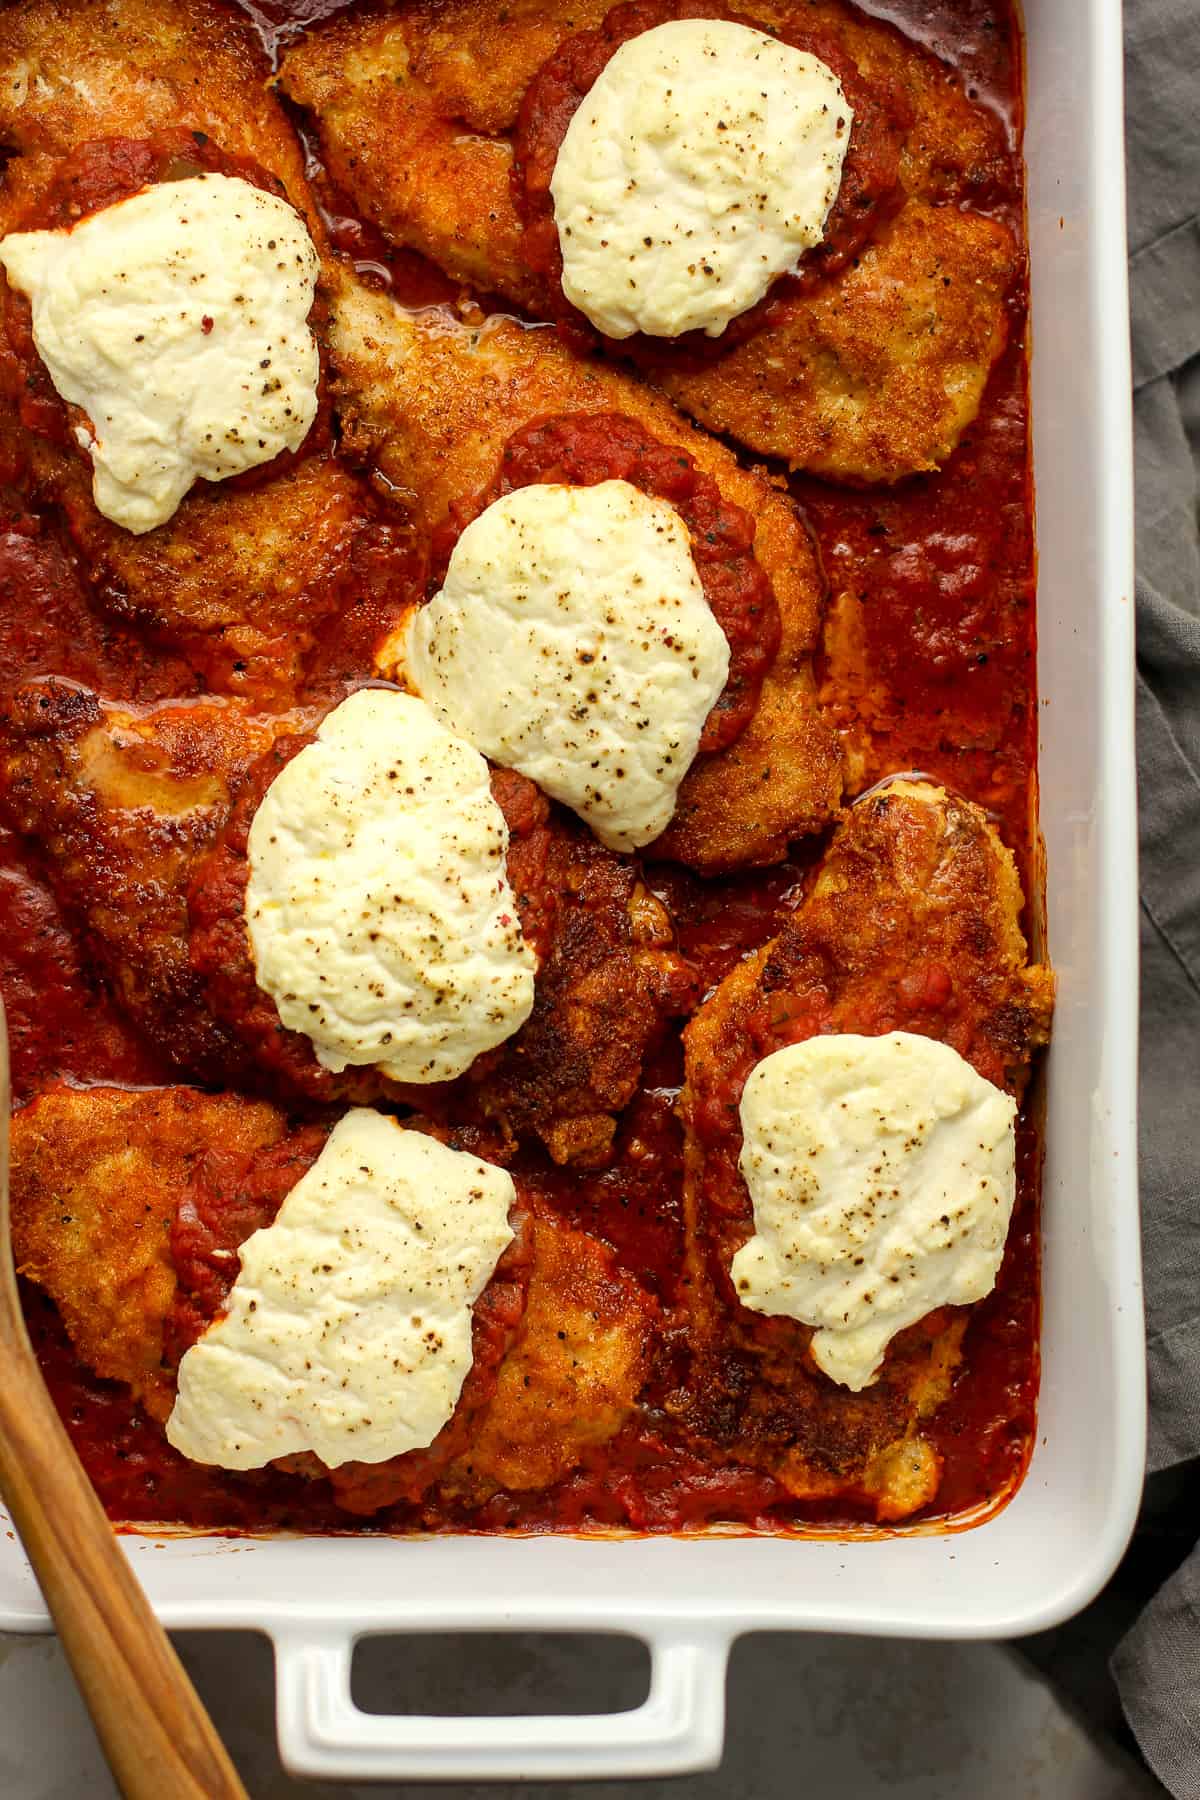 Overhead view of a casserole of chicken parm with red sauce.